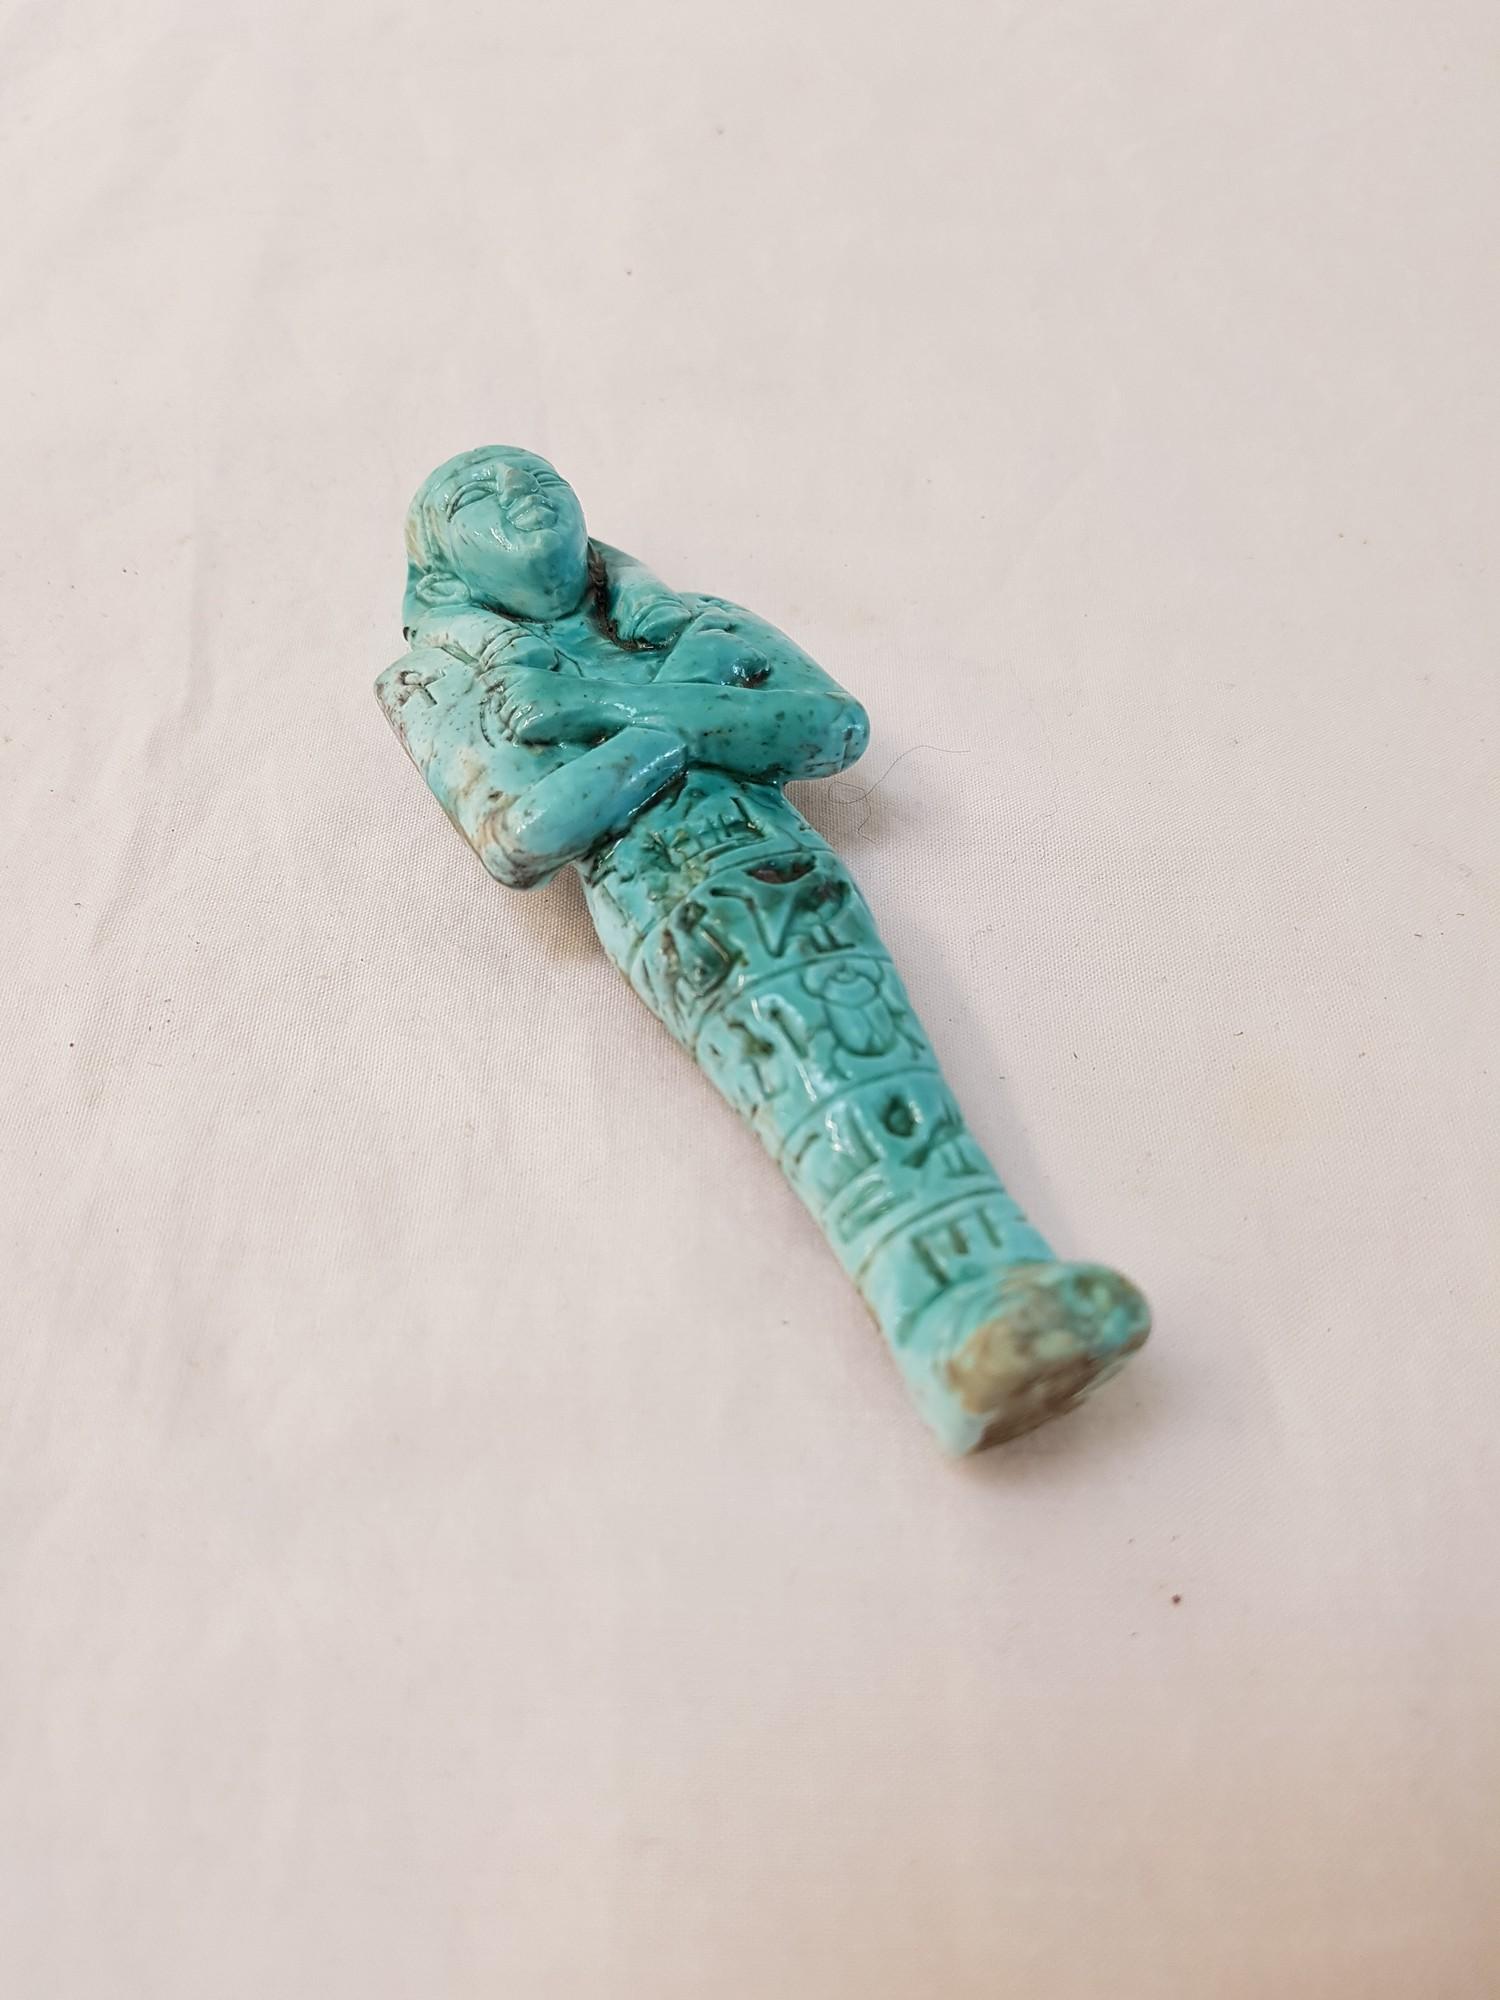 EGYPTIAN PORCELAIN FIGURE of a pharaoh with his arms crossed over his chest, in a turquoise glaze,